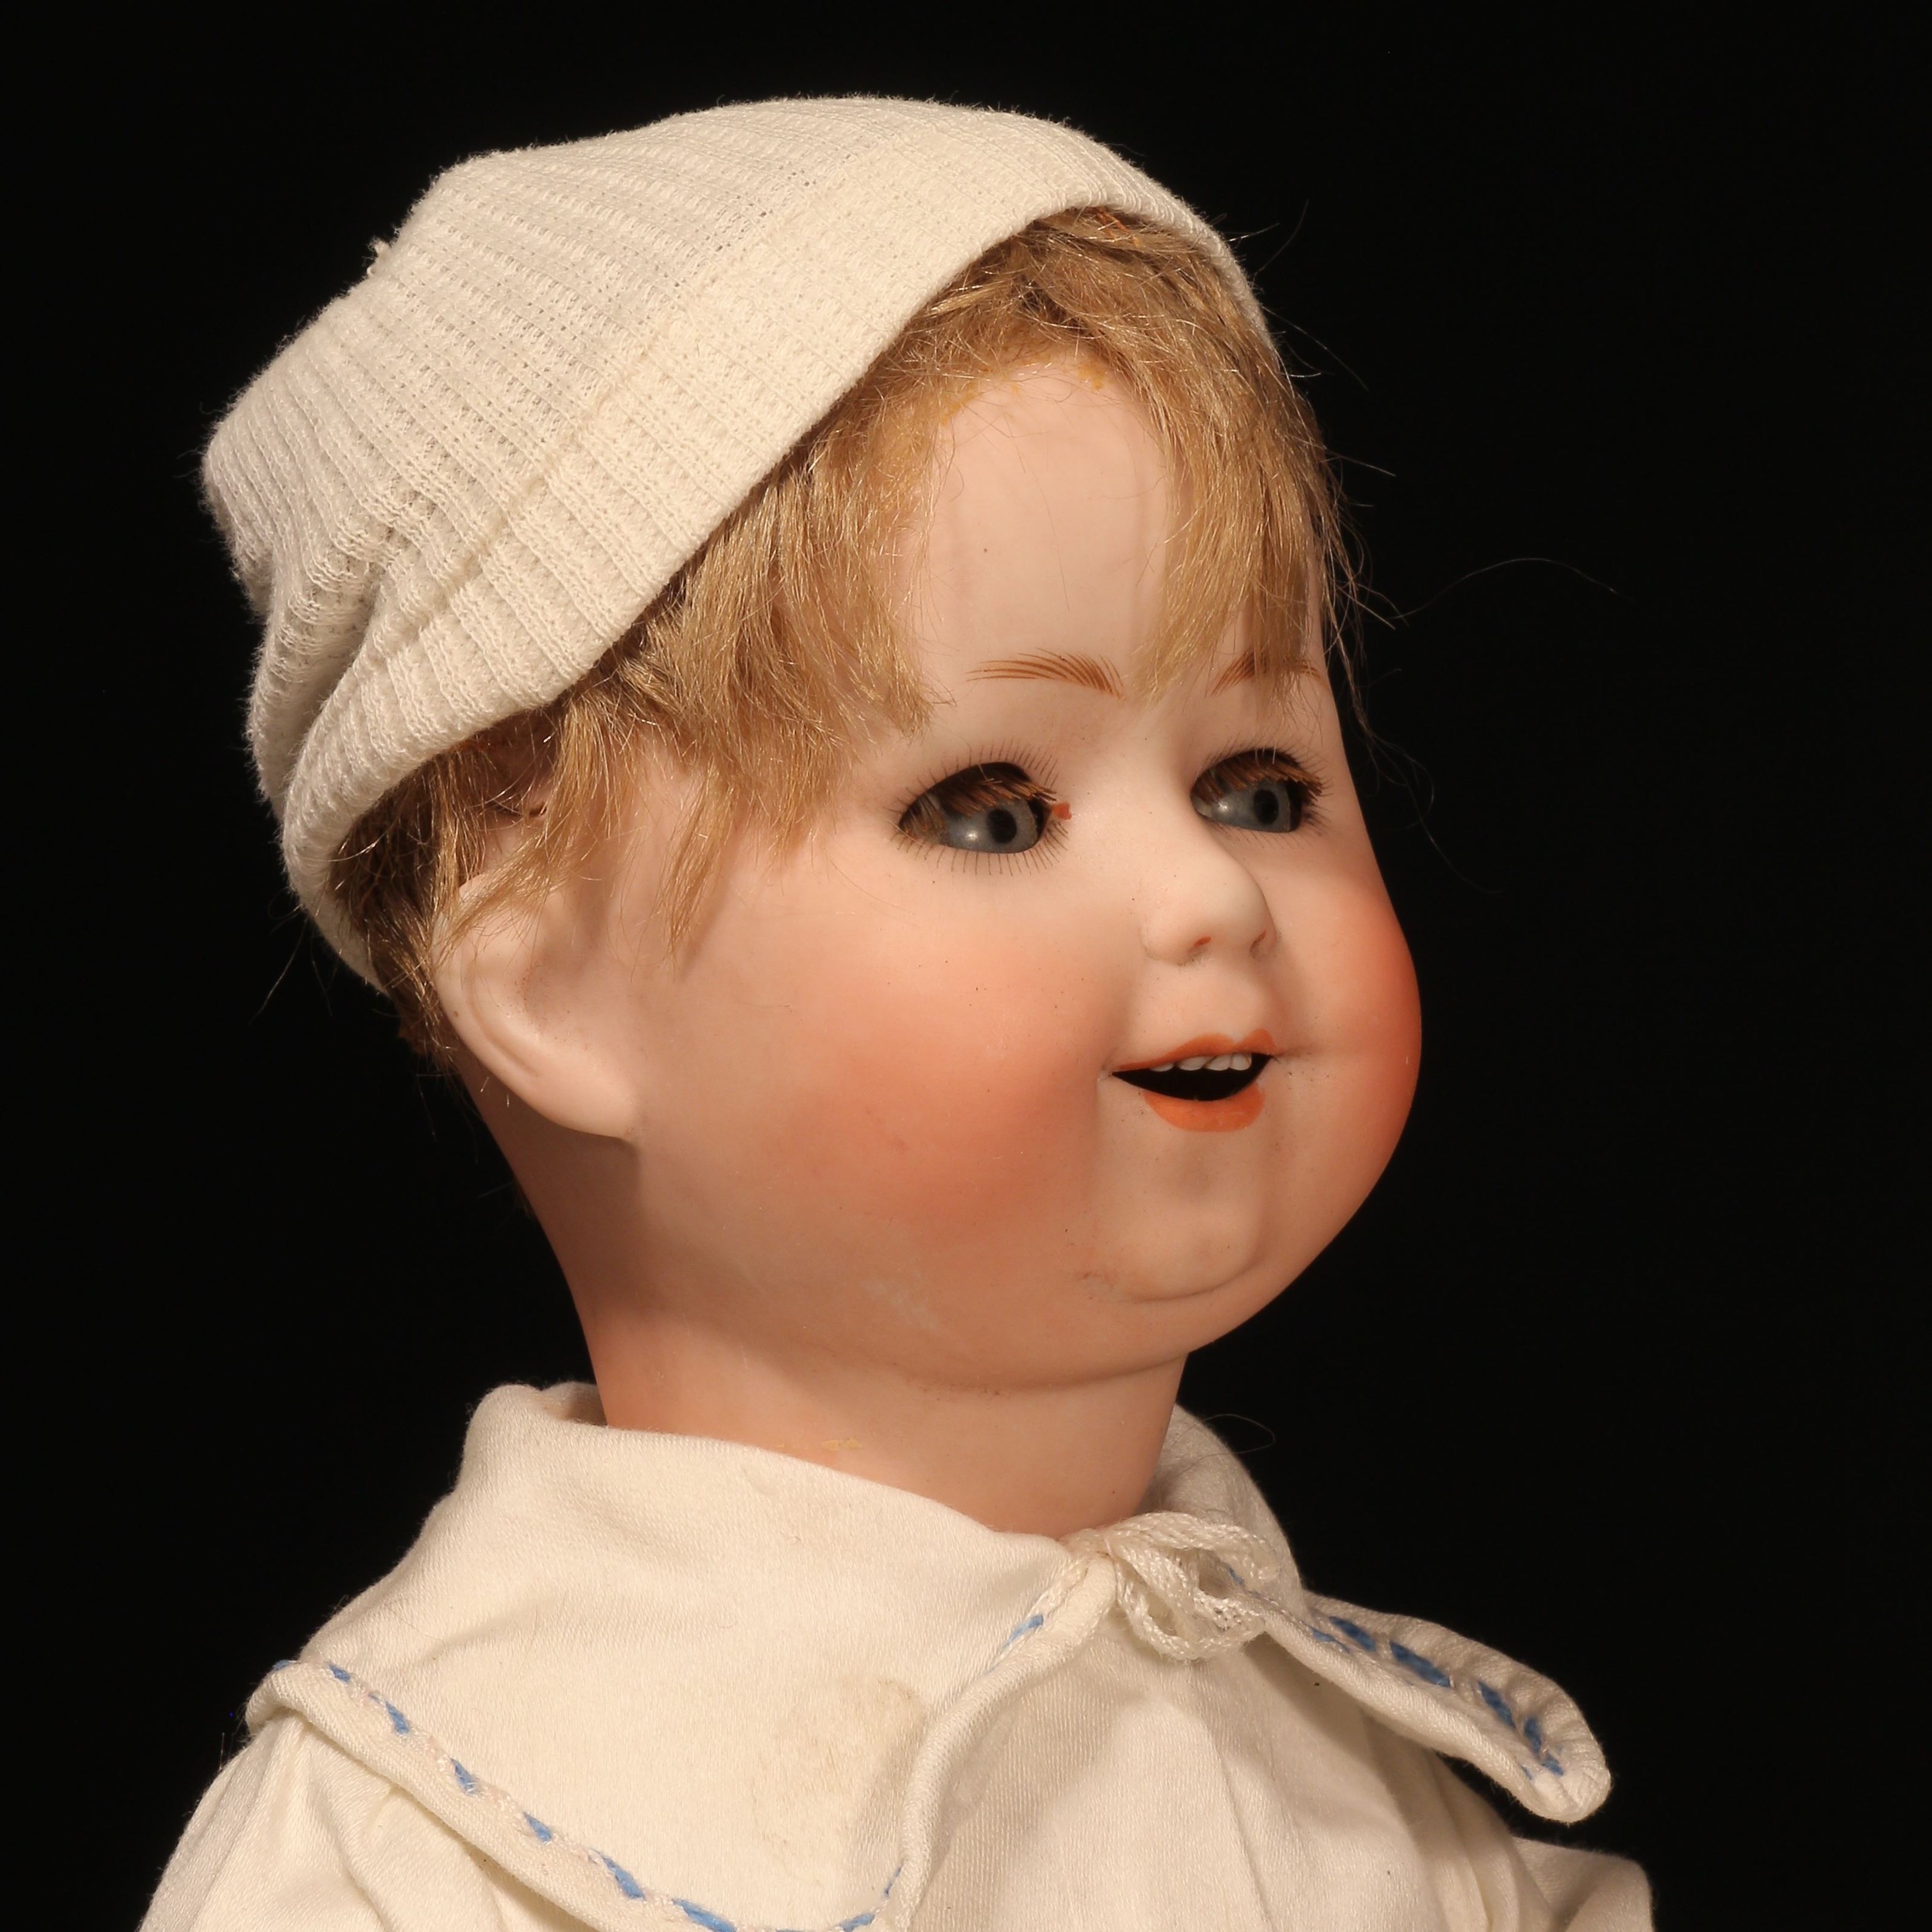 A William Goebel (Germany) bisque head and painted jointed composition bodied character doll, the - Image 2 of 3